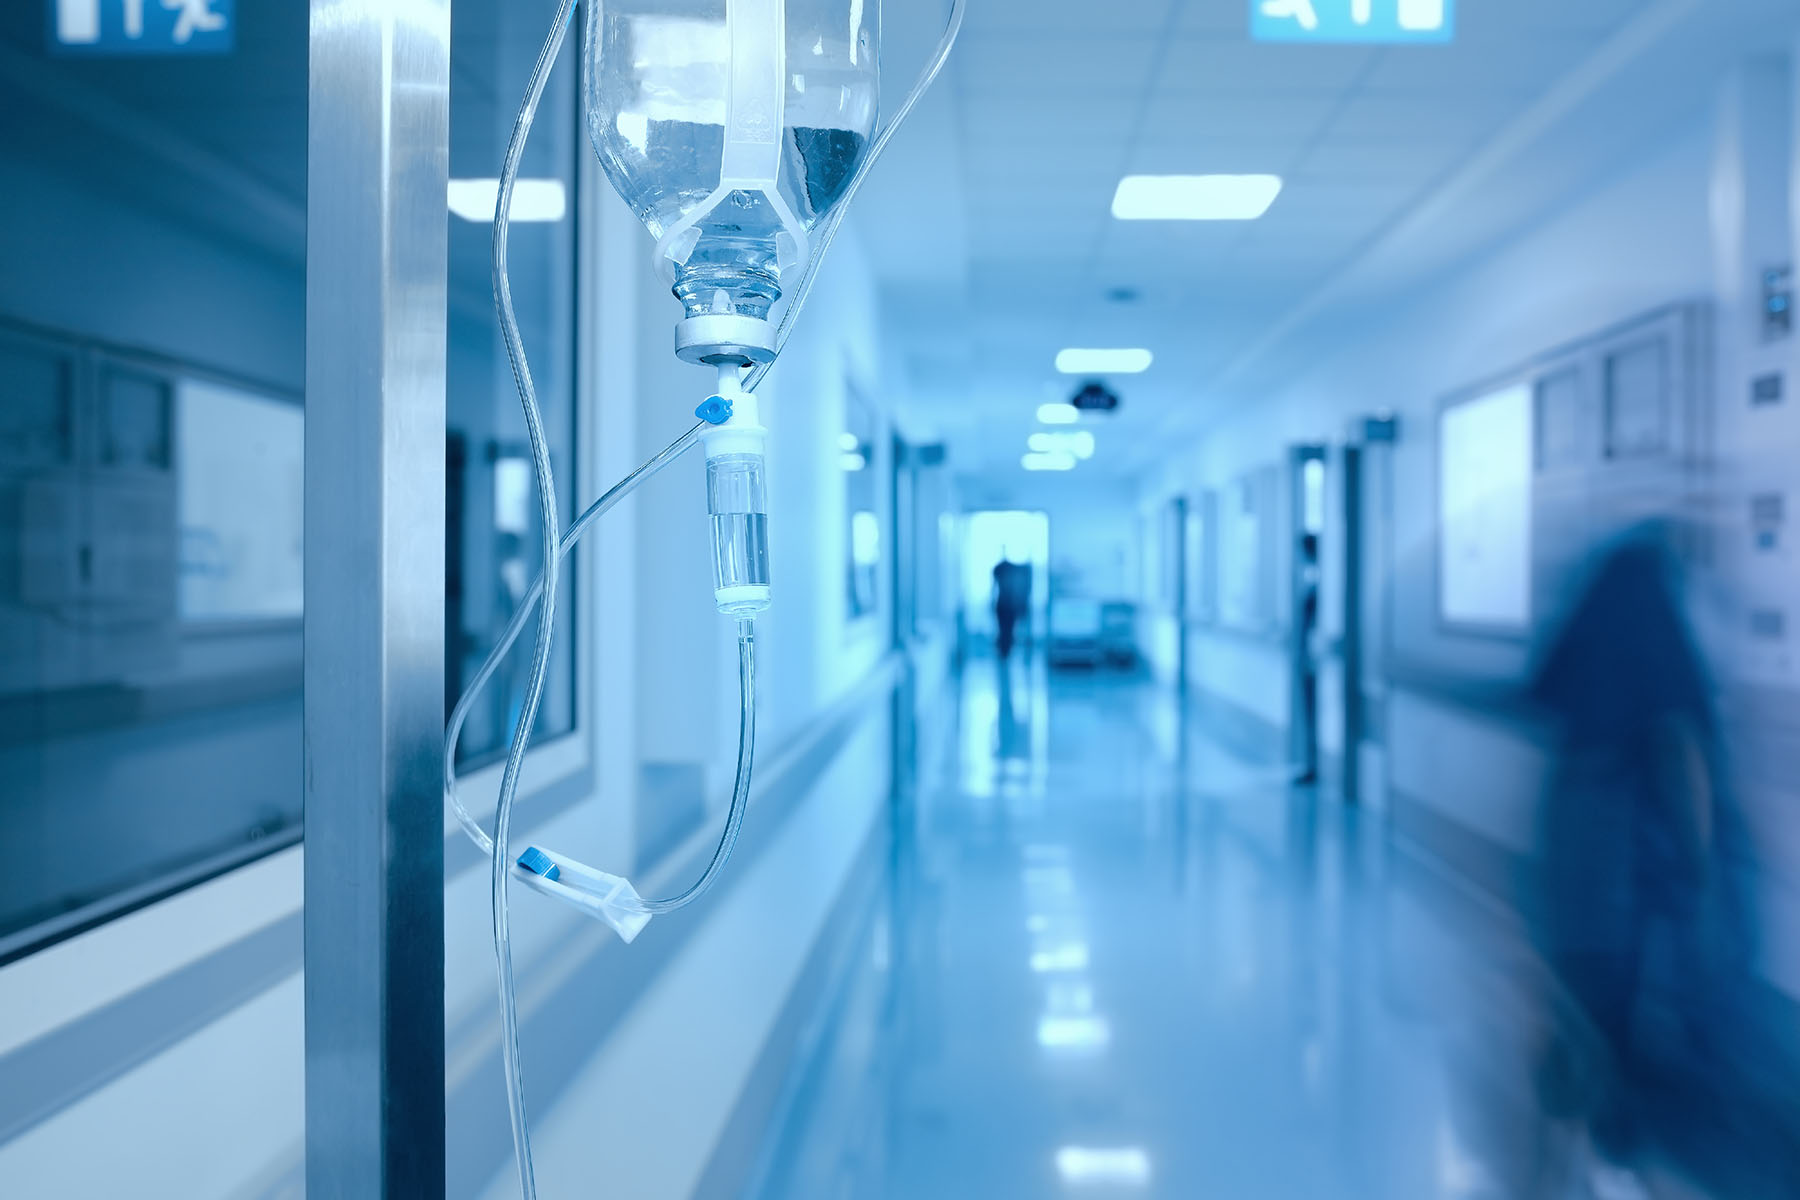 A blue hue shows a hospital hallway with an IV drip in foreground.